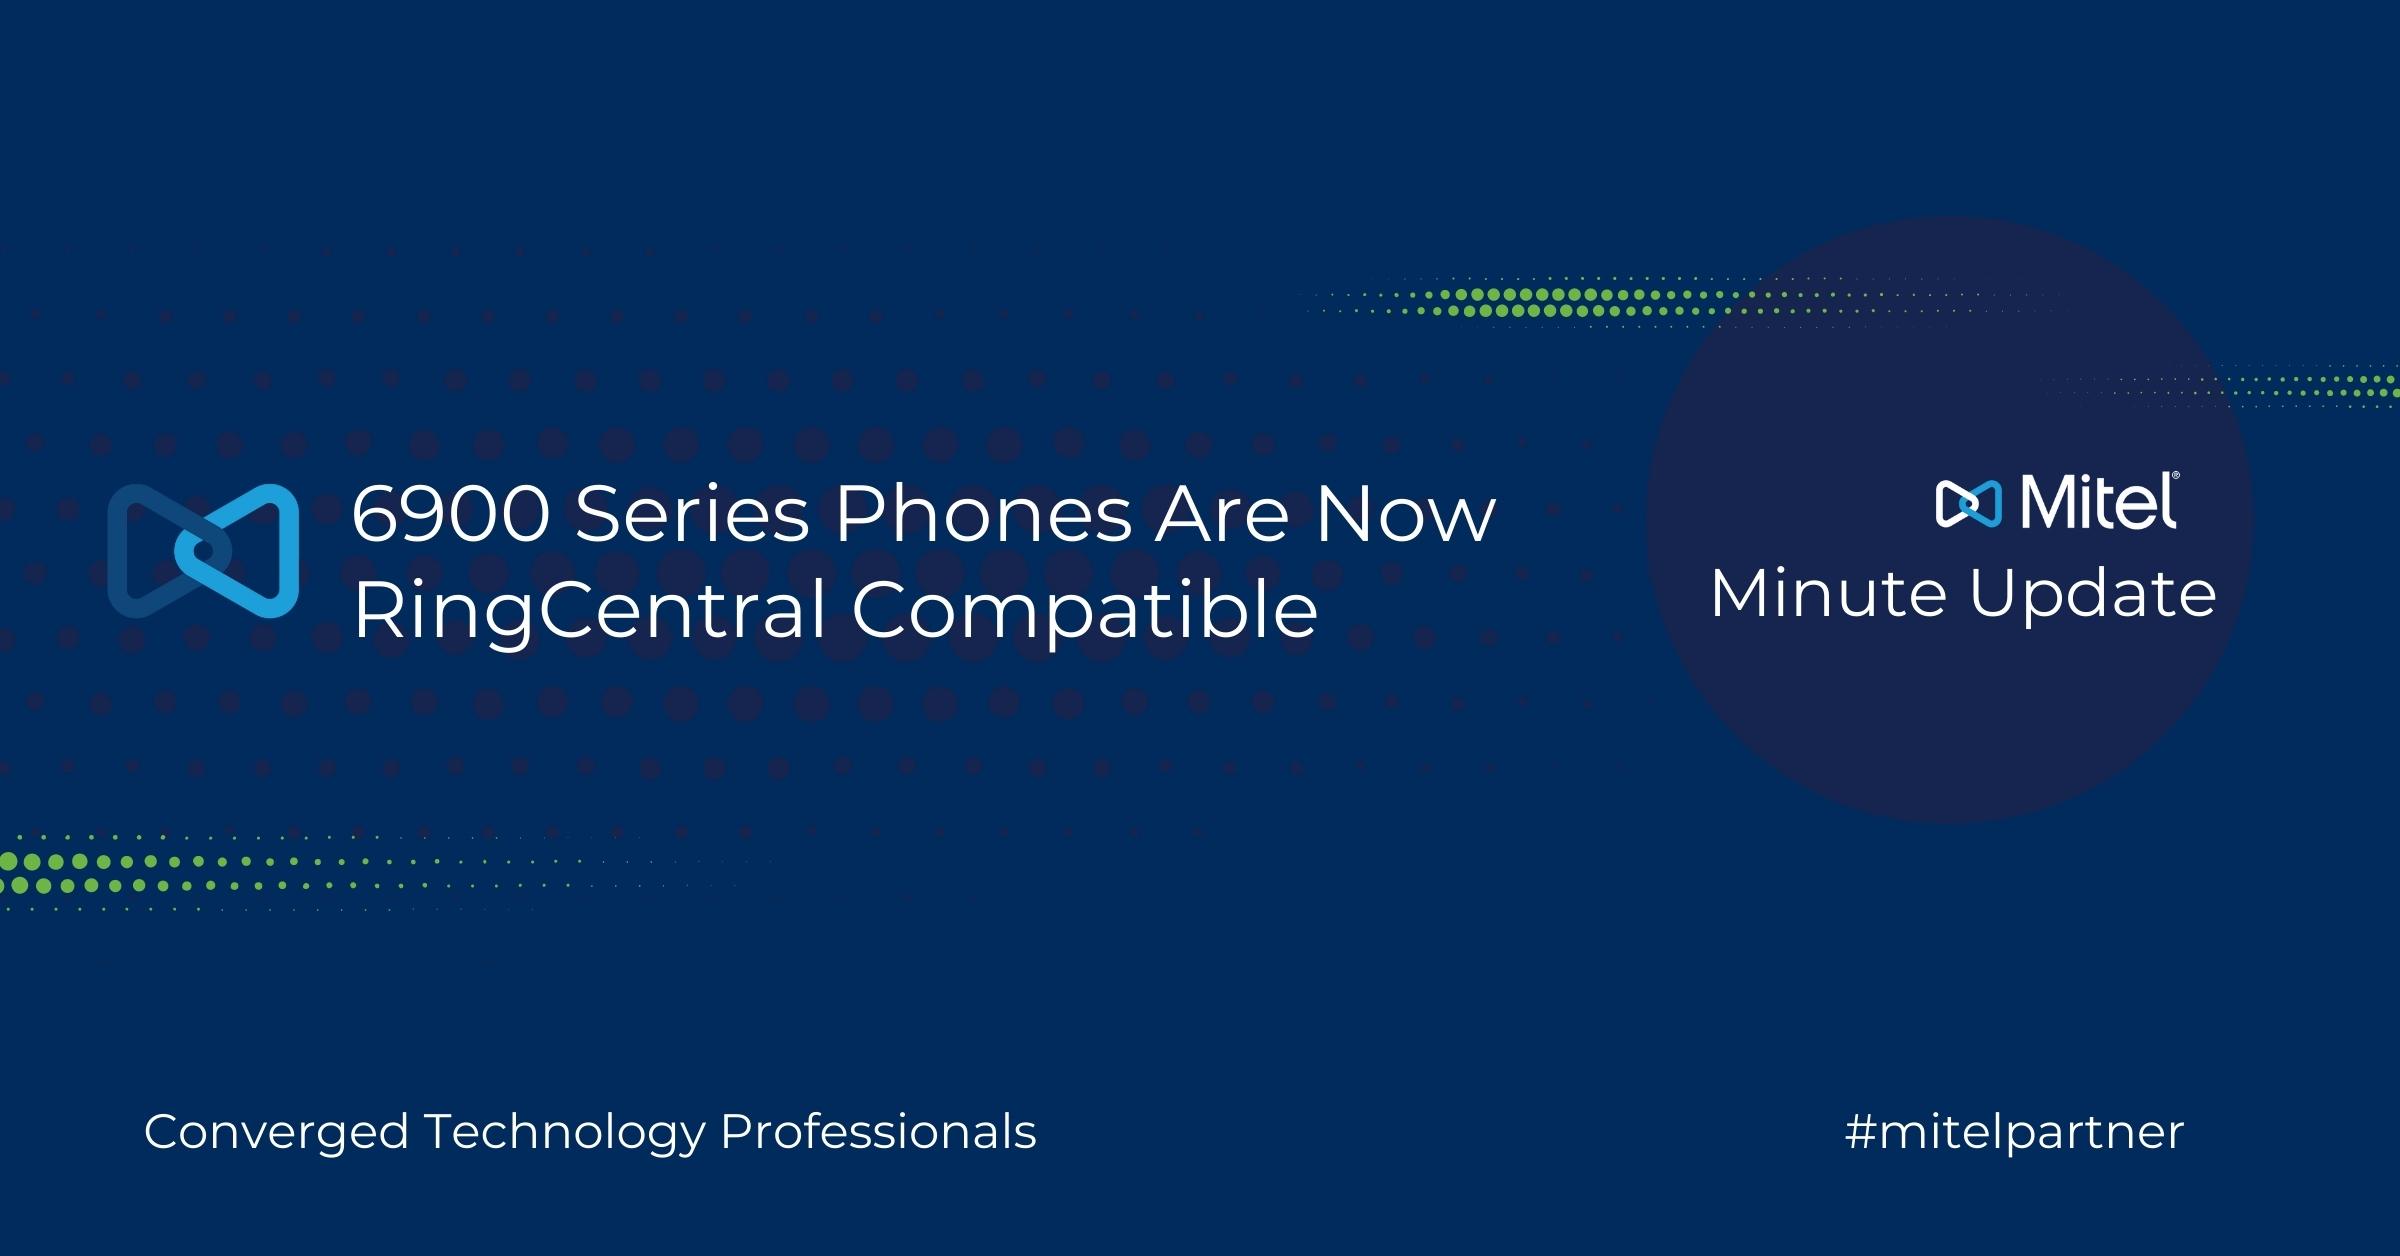 Mitel Minute Update 6900 Series Phones Are Now RingCentral Compatible